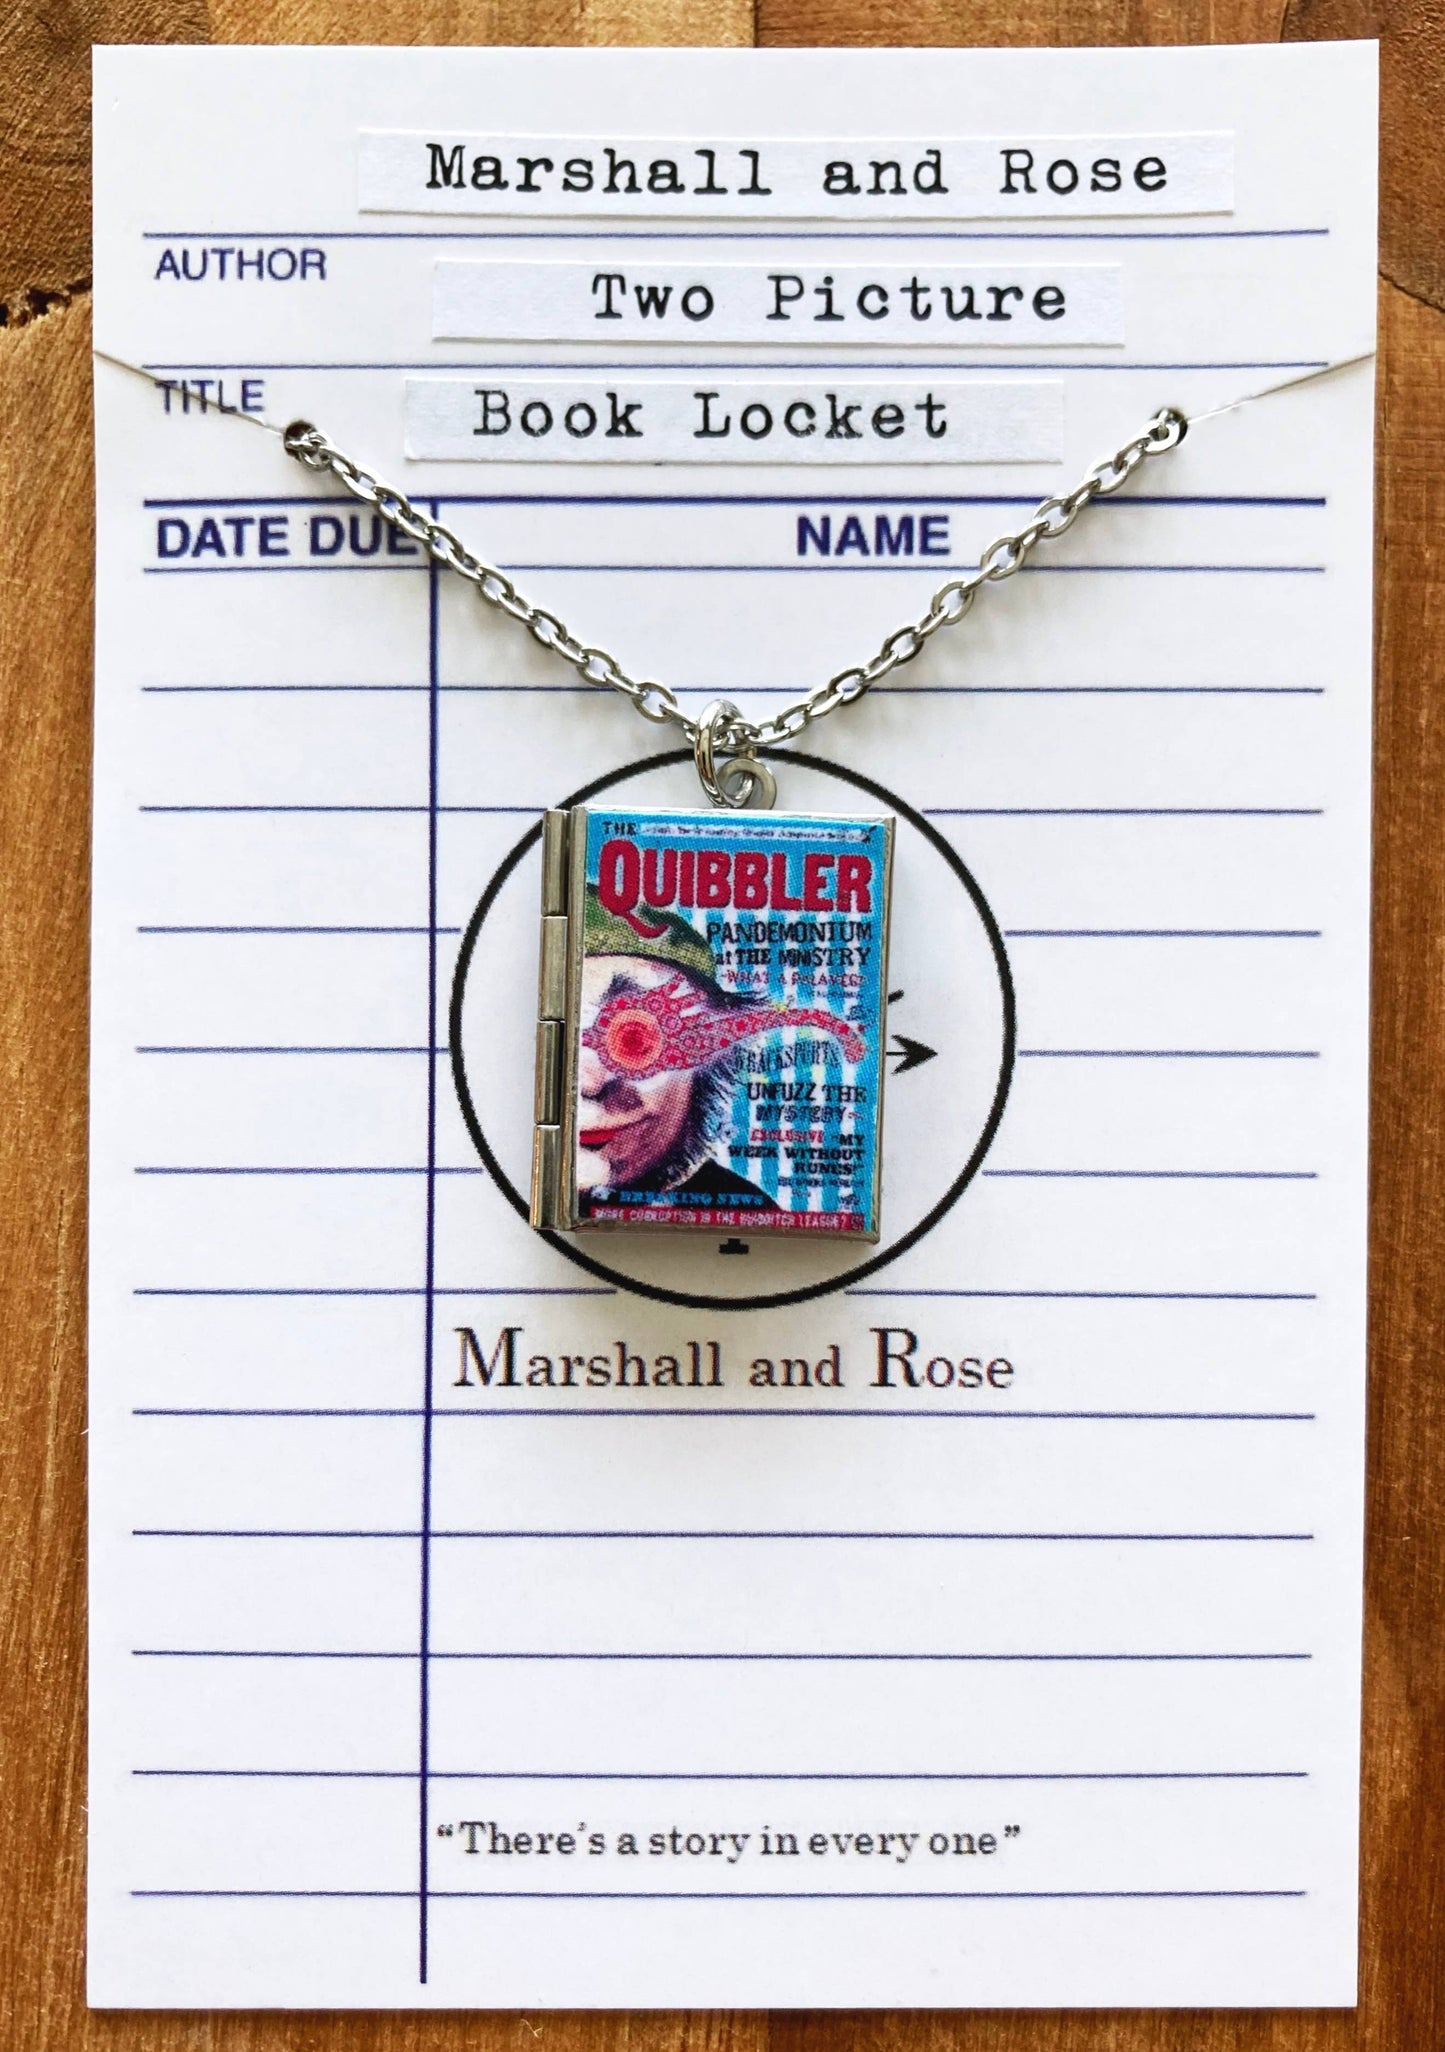 Book Locket Harry Potter - The Quibbler - Stainless Steel